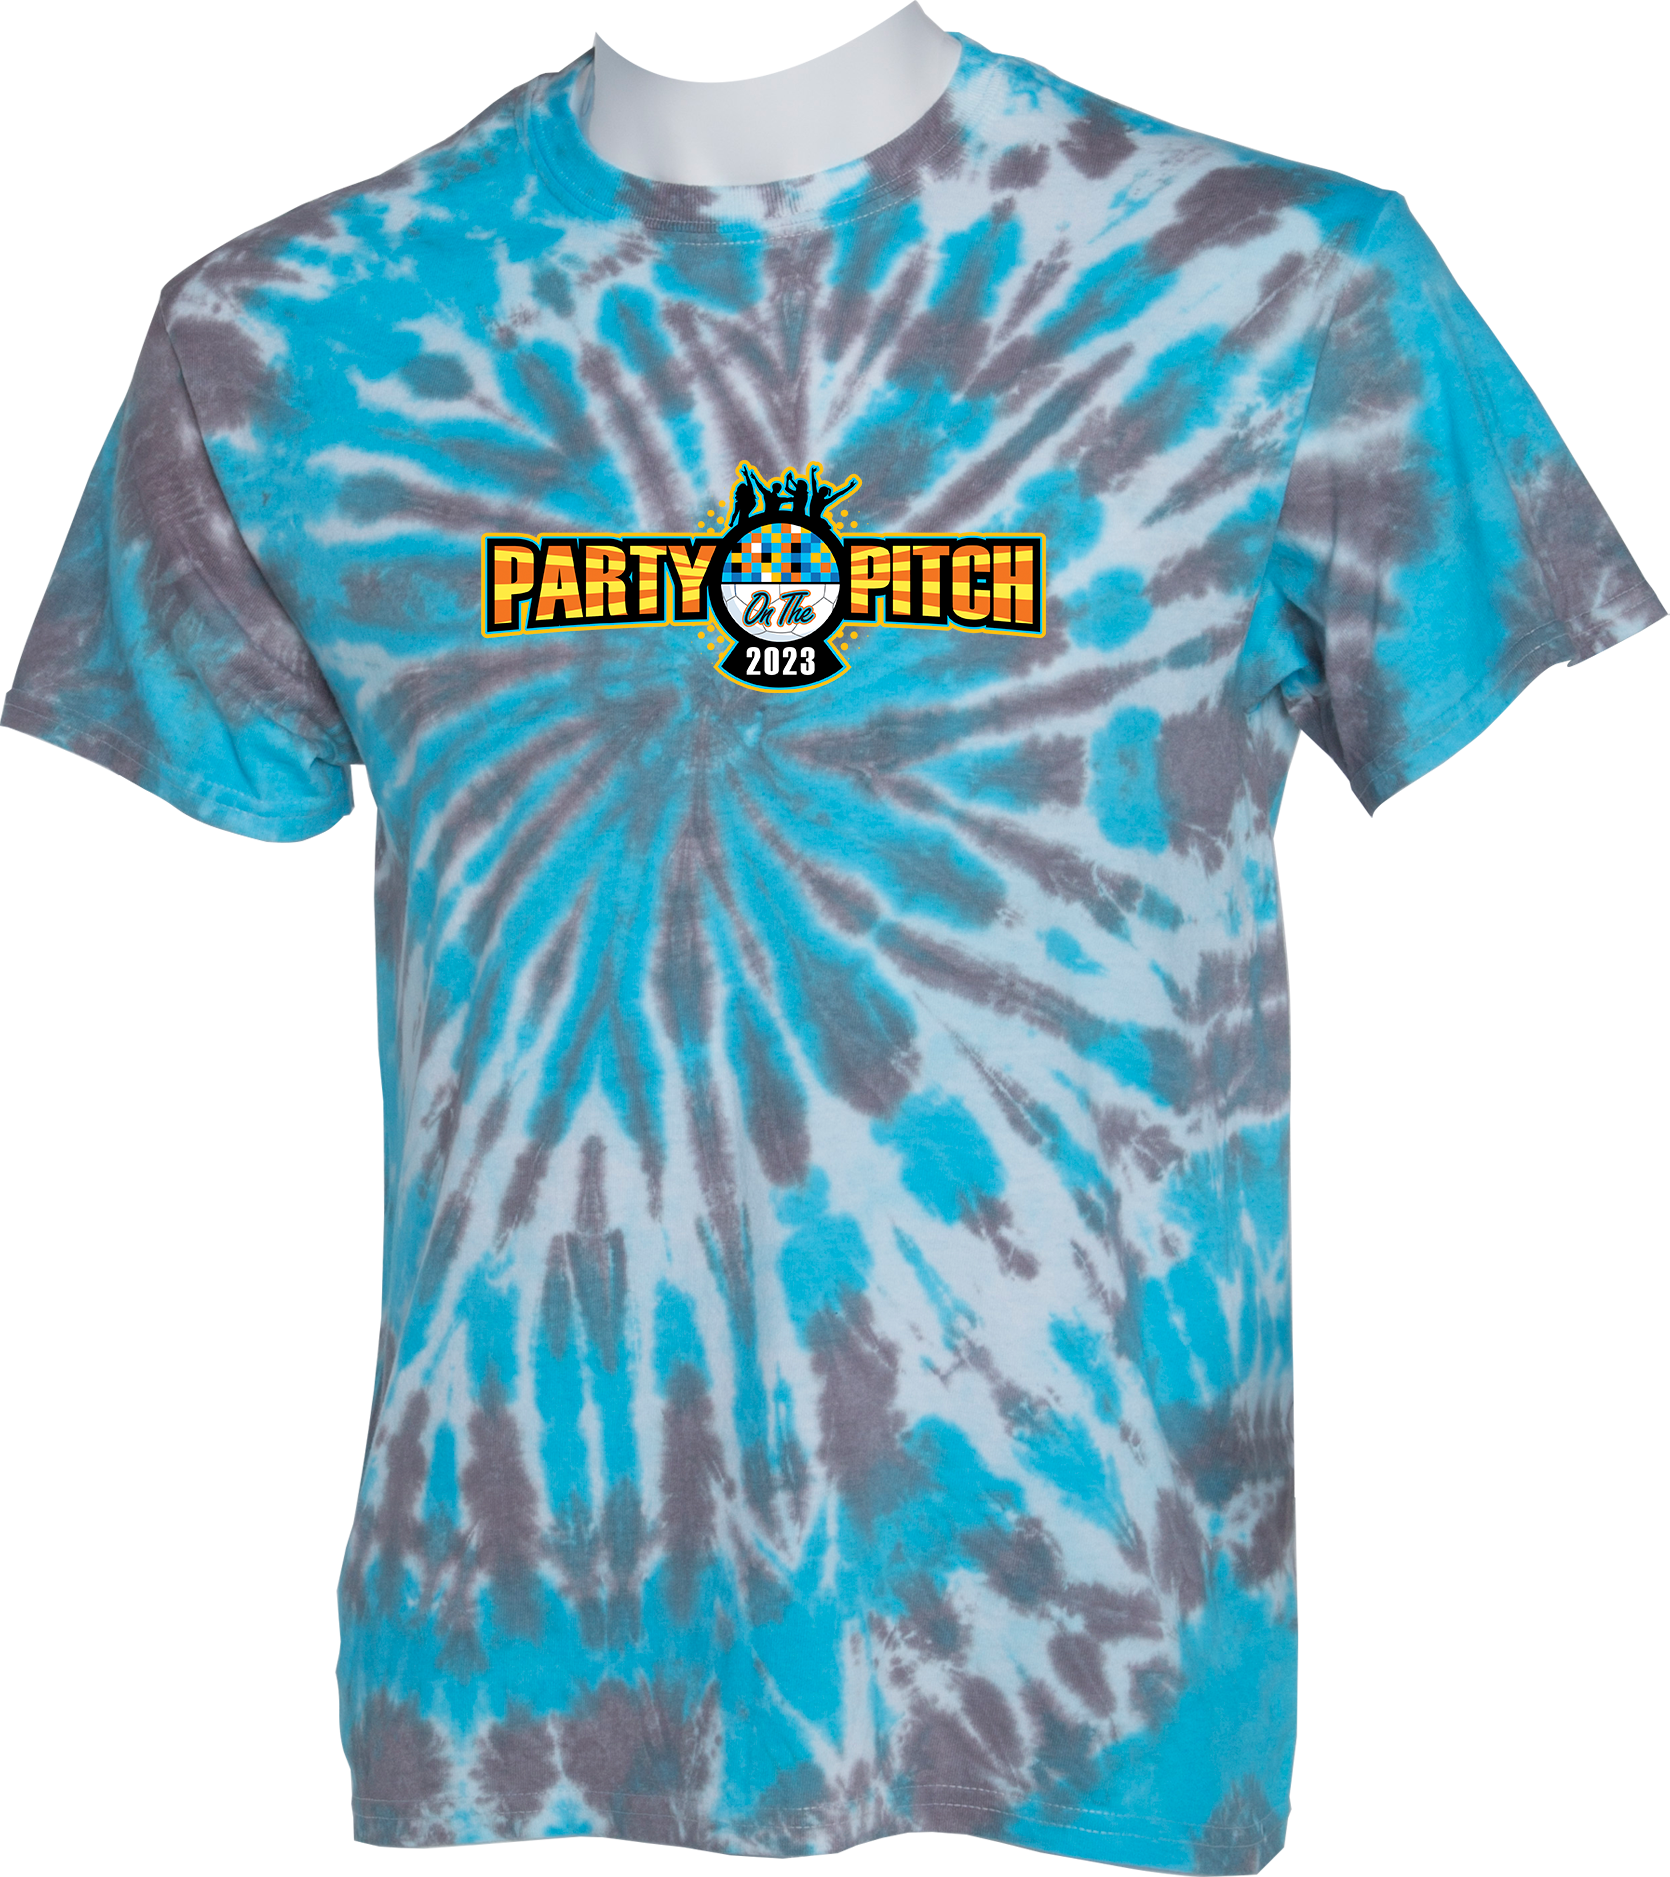 TIE-DYE SHORT SLEEVES - 2023 Party On The Pitch